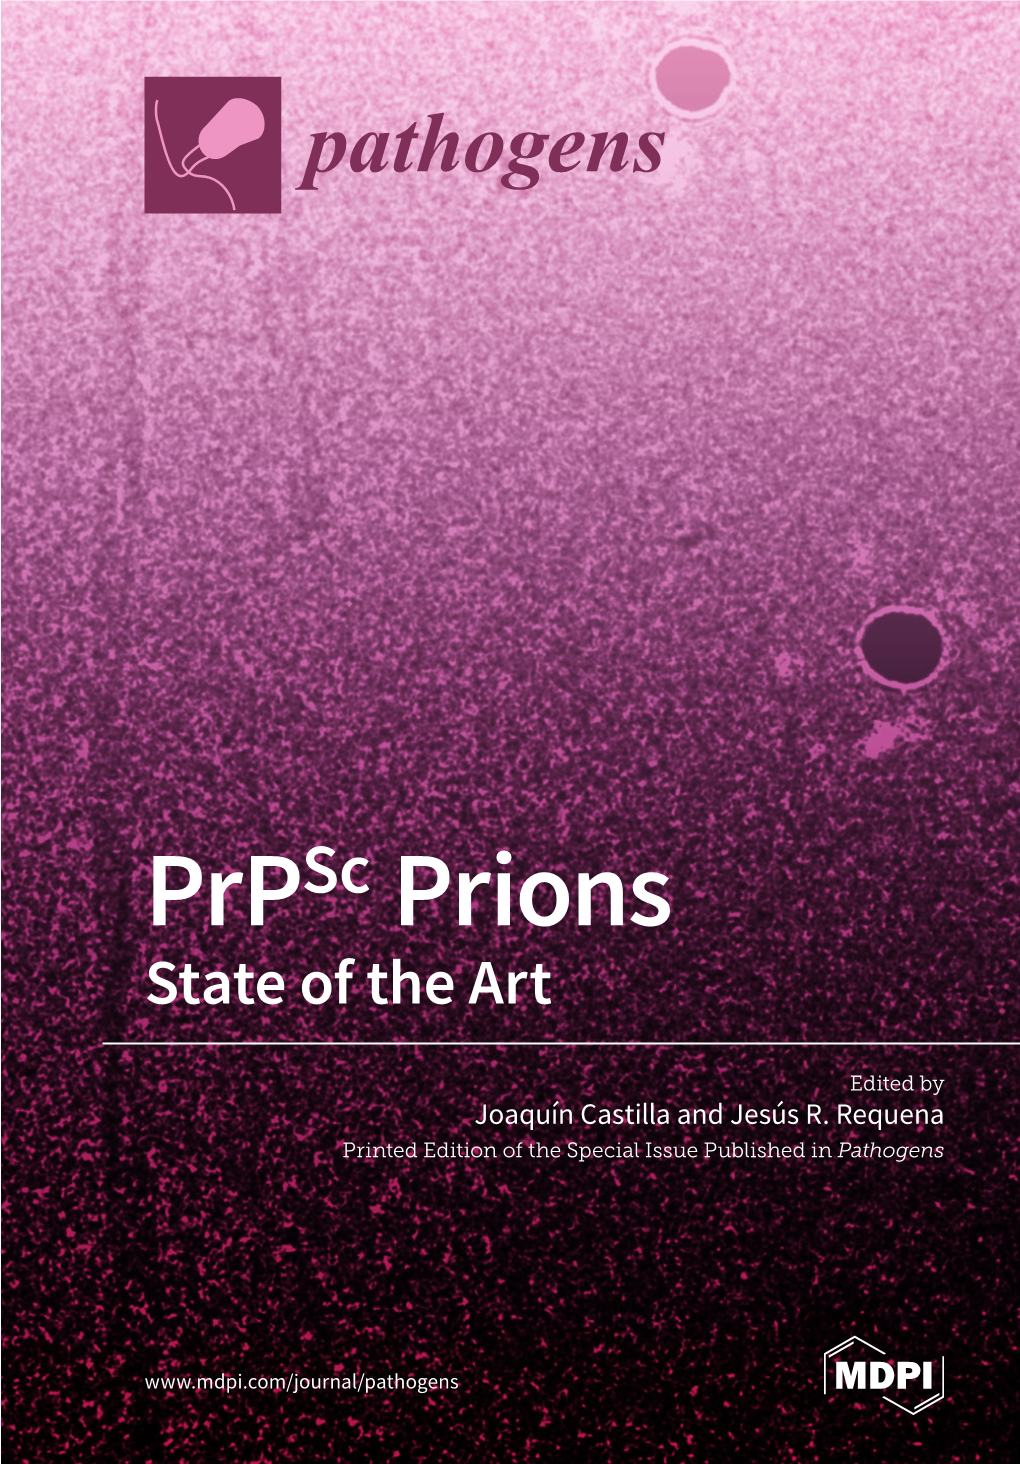 Prpsc Prions State of the Art